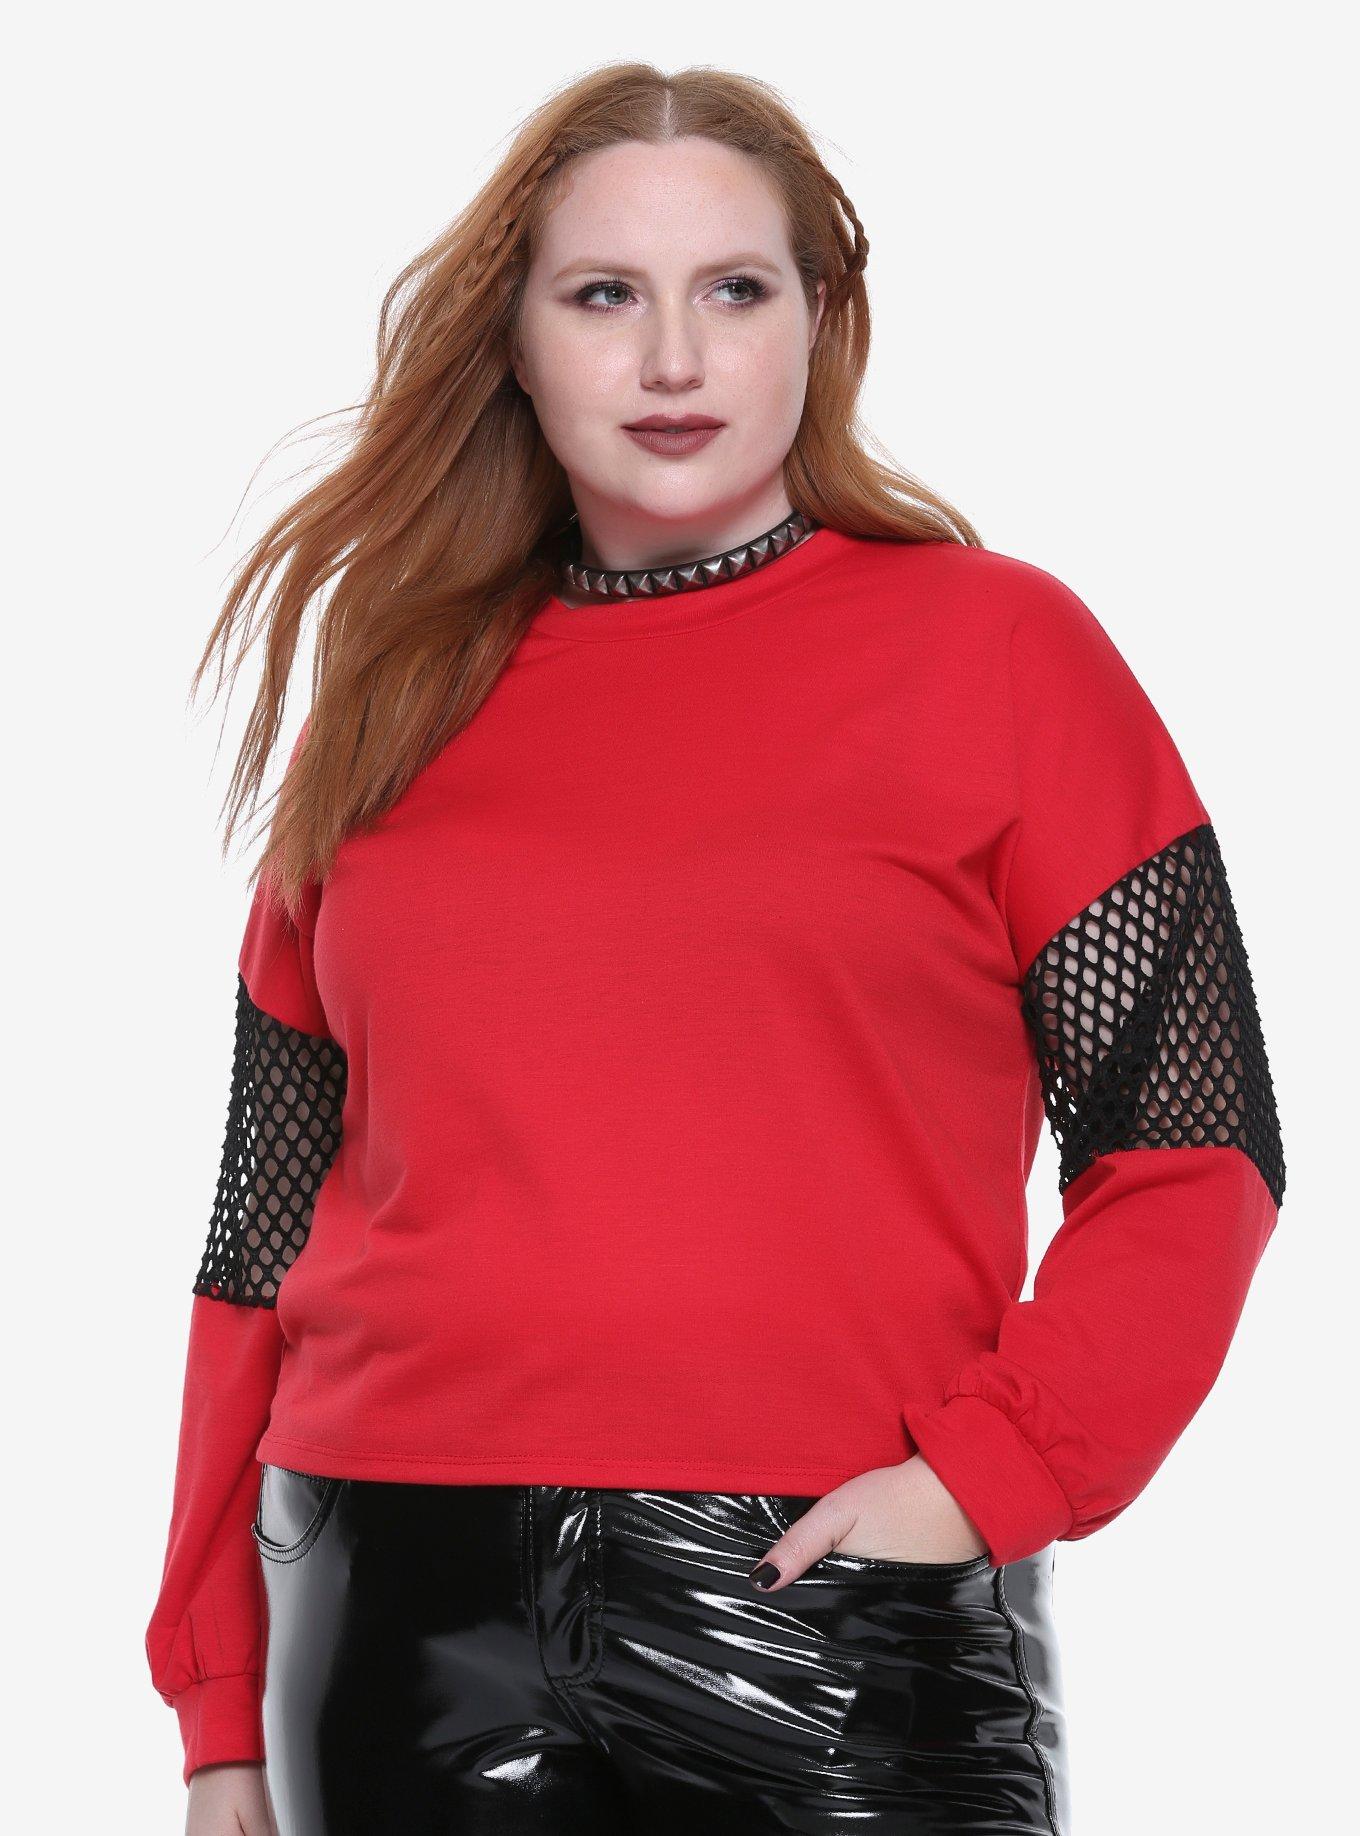 Red & Black Fishnet Inset Sleeve Crop Girls Top Plus Size | Hot Topic